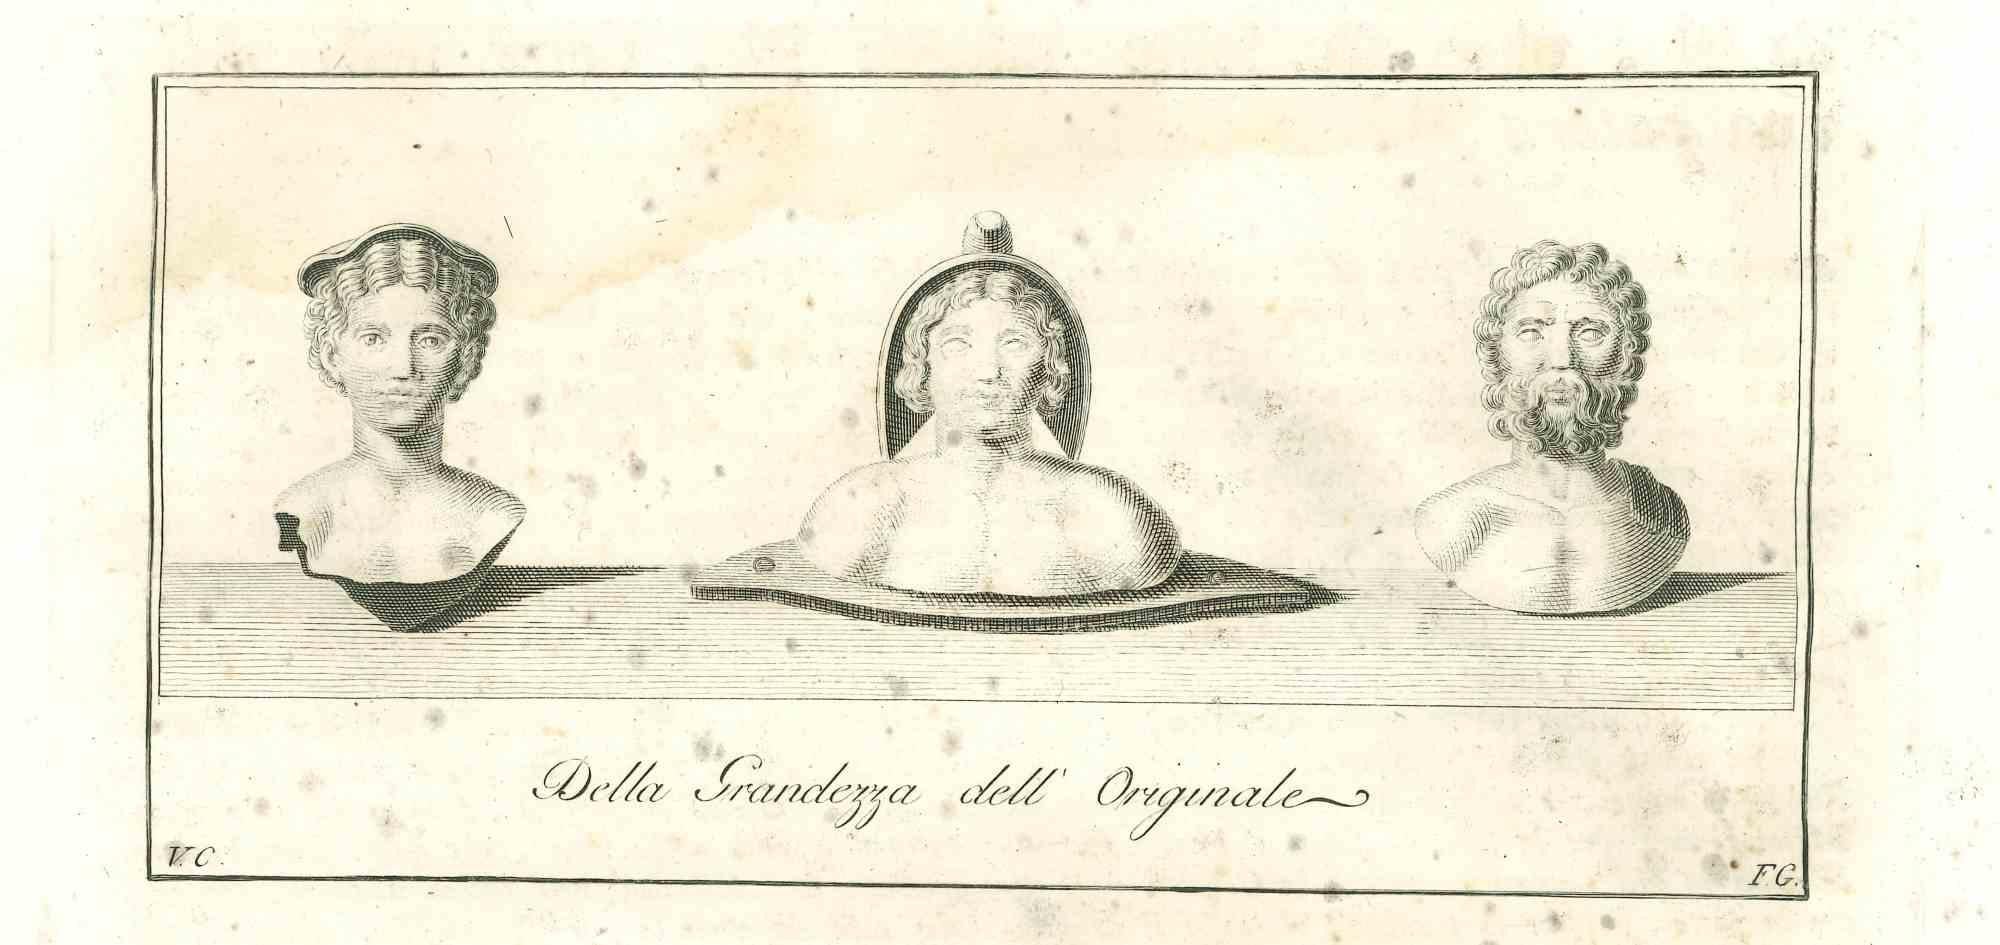 Ancient Roman Statues, from the series "Antiquities of Herculaneum", is an original etching on paper realized from a design by Vincenzo Campana in the 18th Century.

Signed on the plate.

Good conditions.

The etching belongs to the print suite